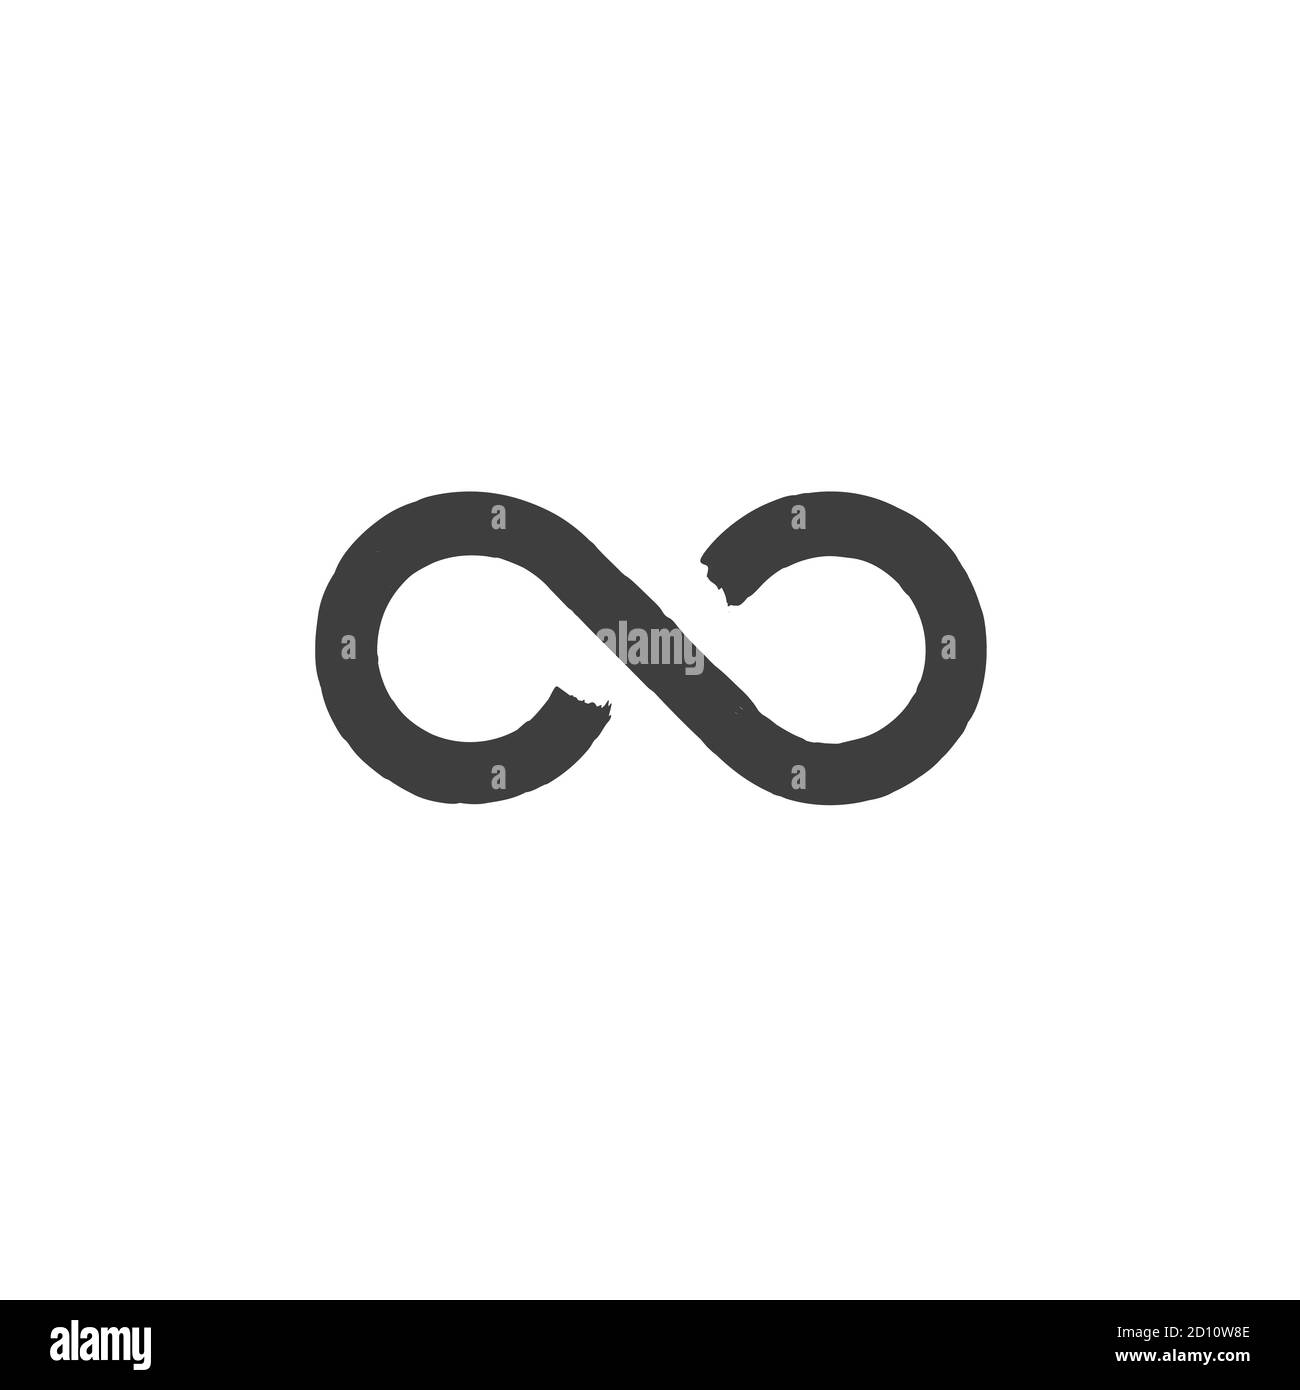 The infinity icon. Brush drawn Infinity symbol. Flat endless concept. Stock vector illustration isolated on white background. Stock Vector